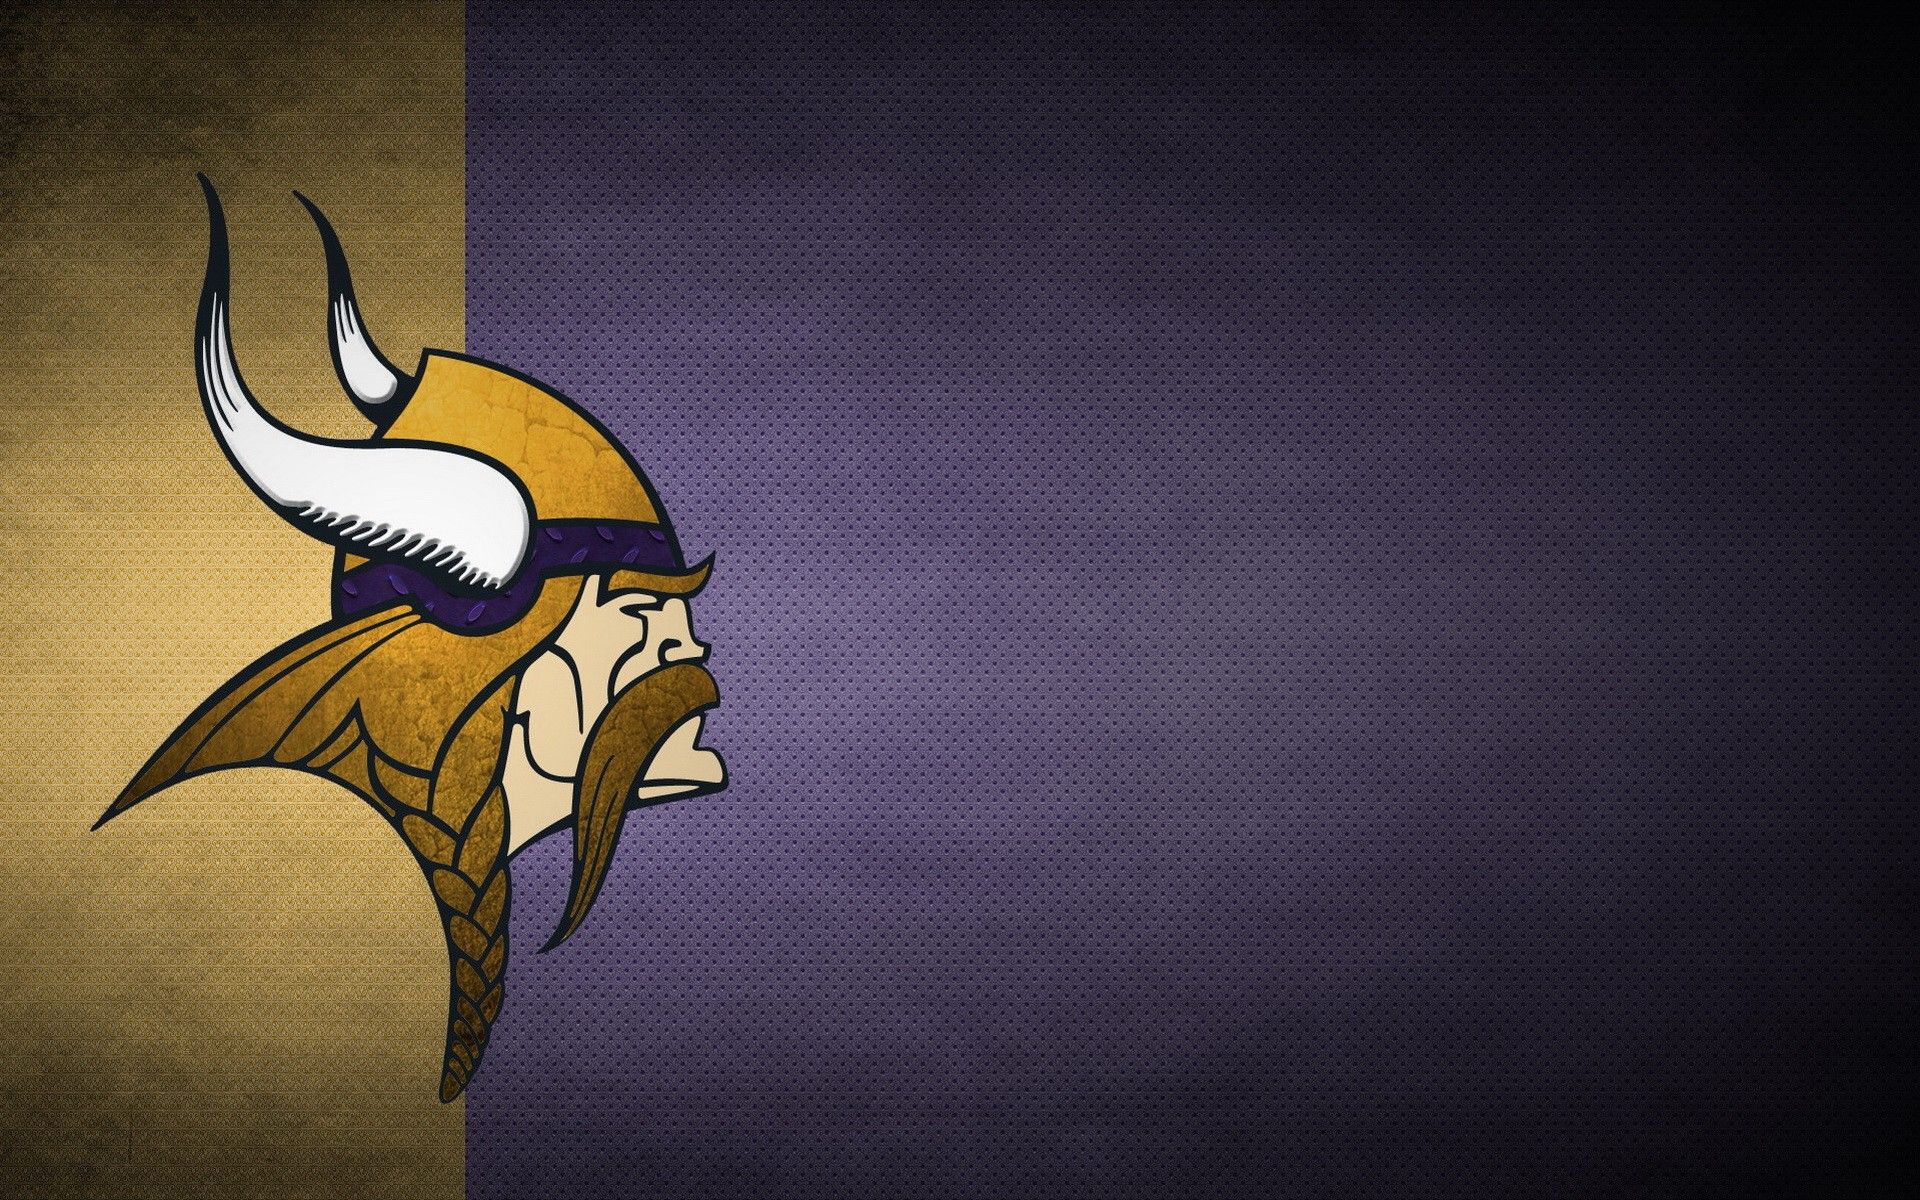 Minnesota Vikings Icon Wallpapers HD Backgrounds Wallpapers Amazing Cool Tablet Smart Phone 4k High Definition 1920x1200